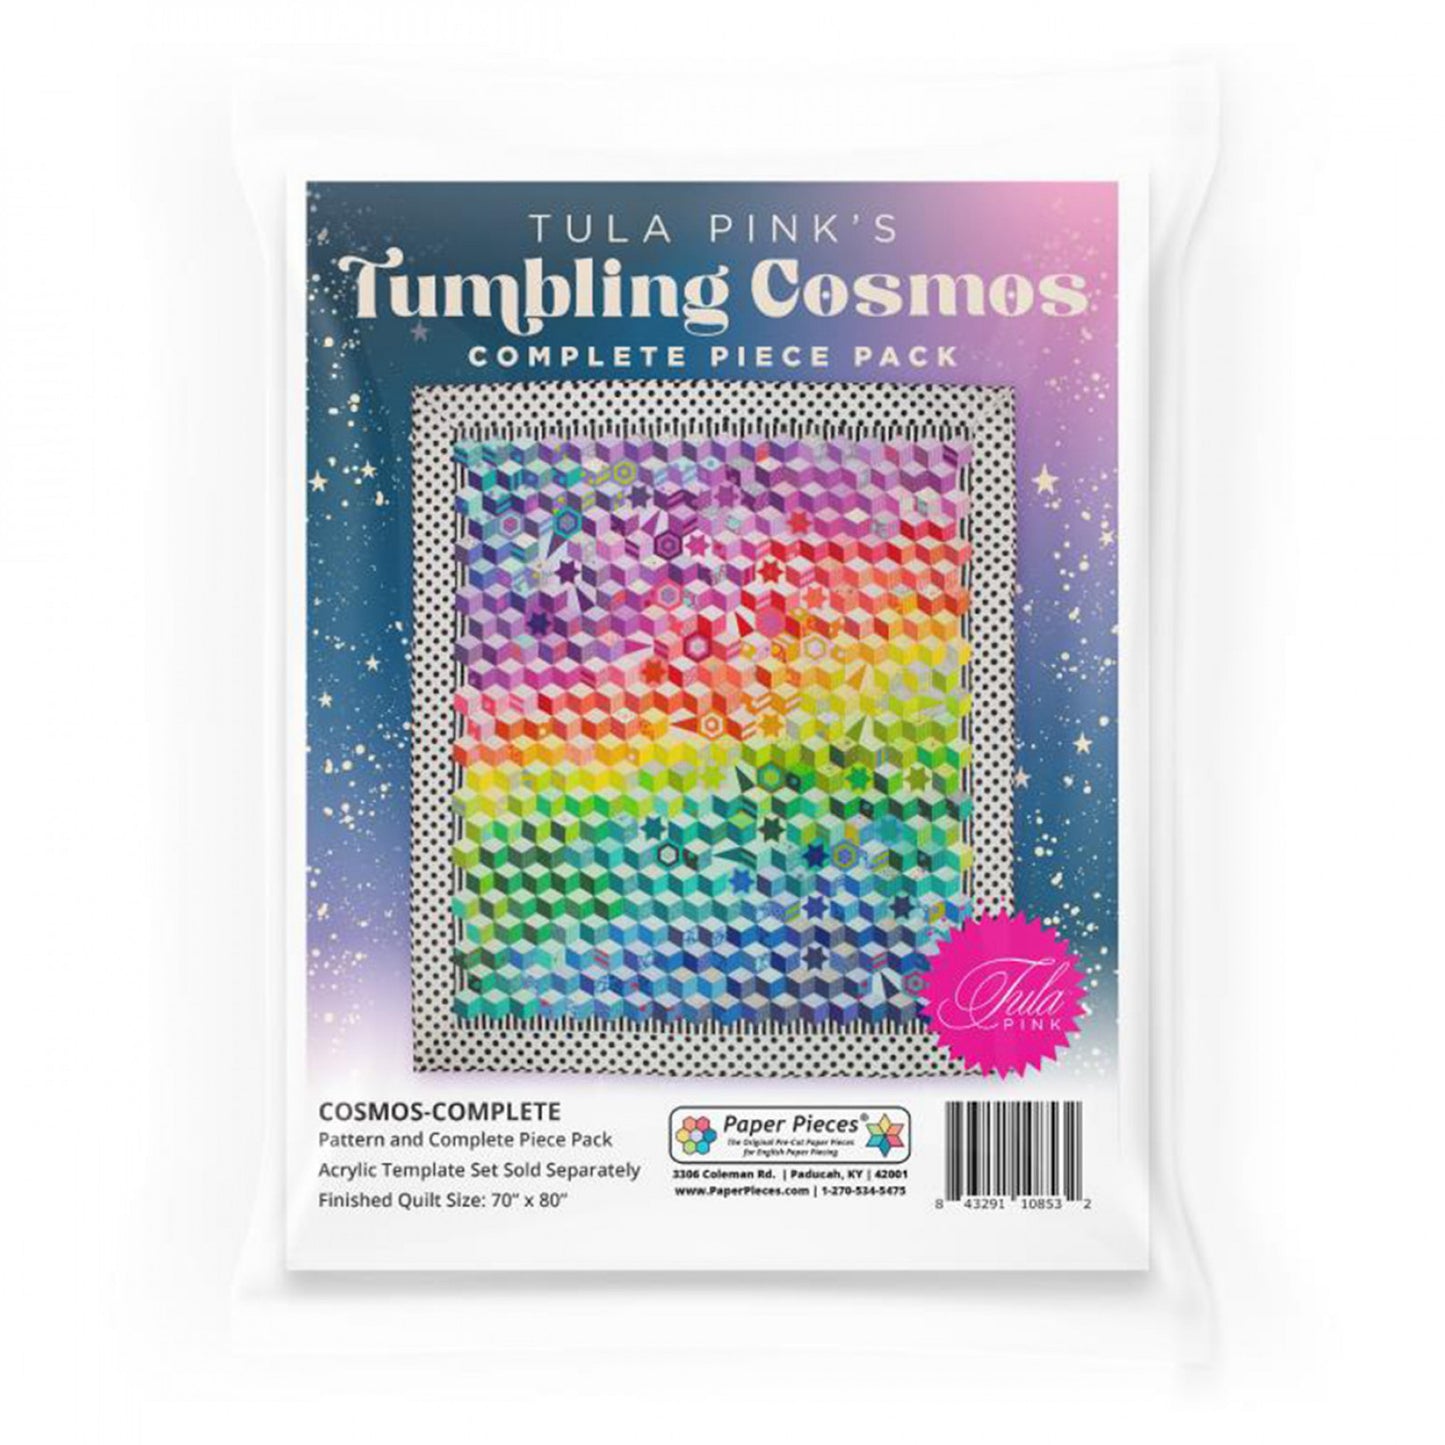 Tumbling Cosmos Pattern and Paper Pieces